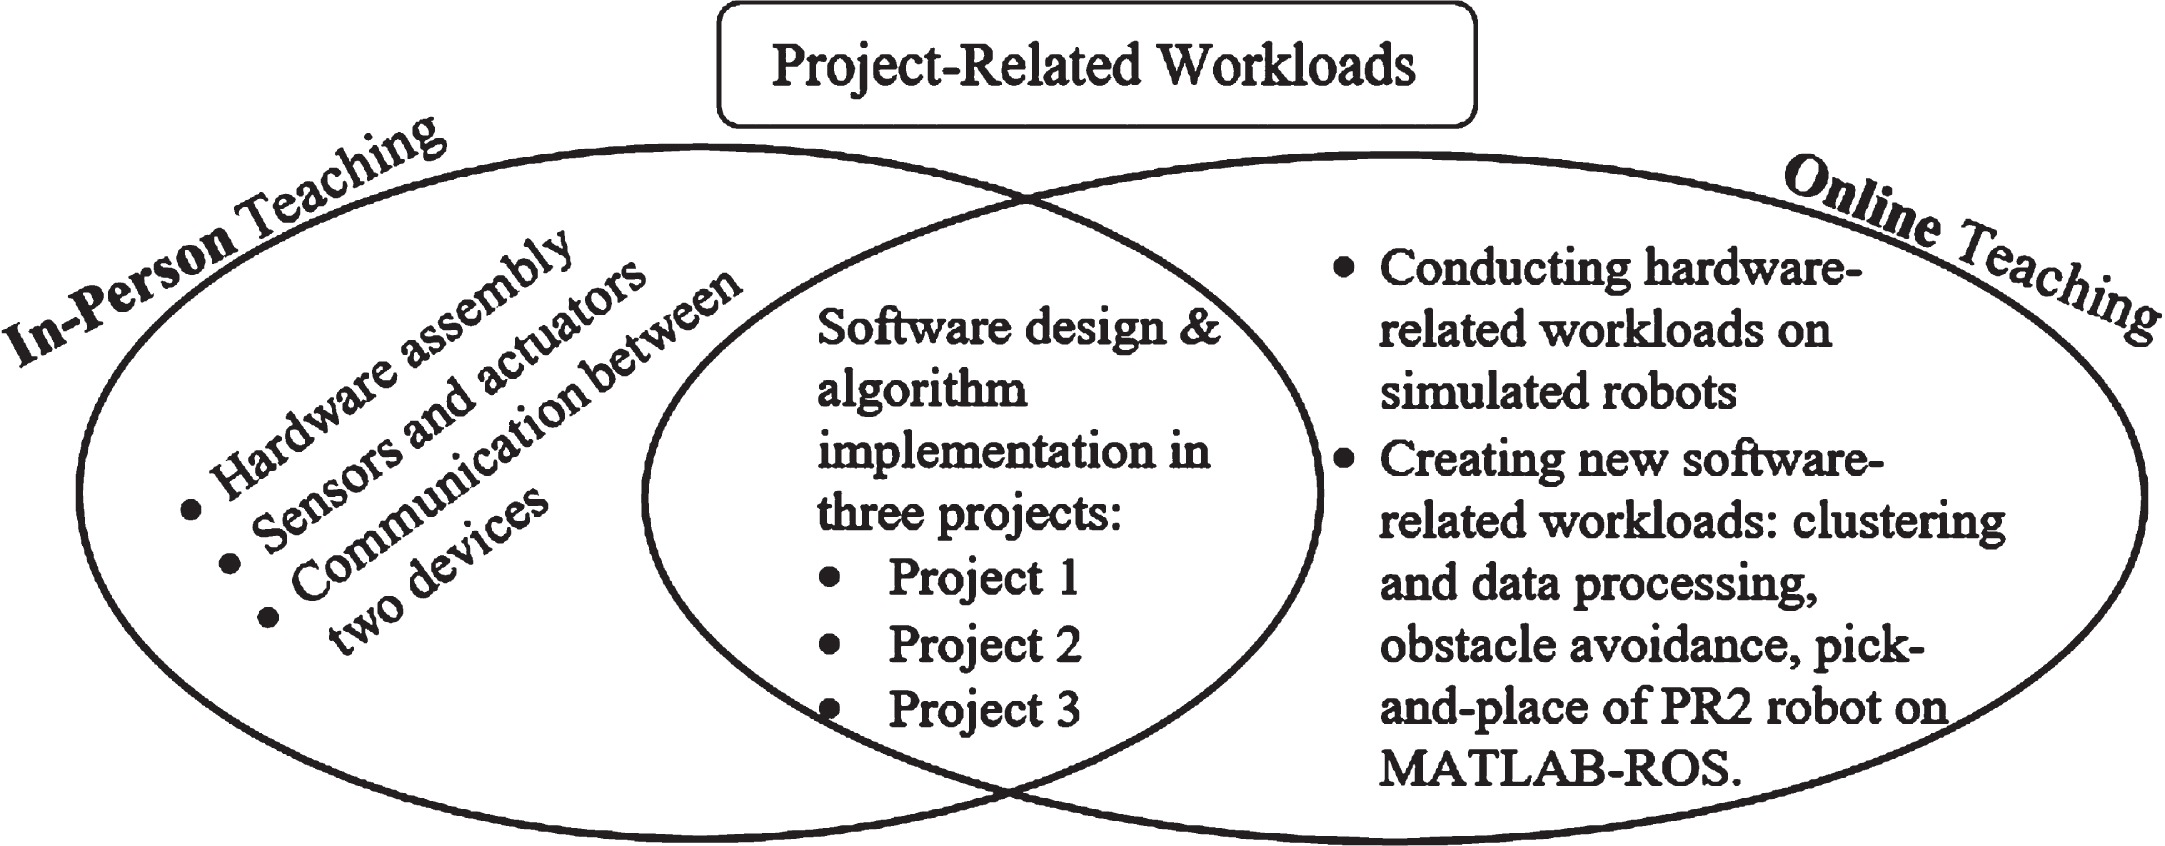 Project-related workloads conducted in-person vs. online.